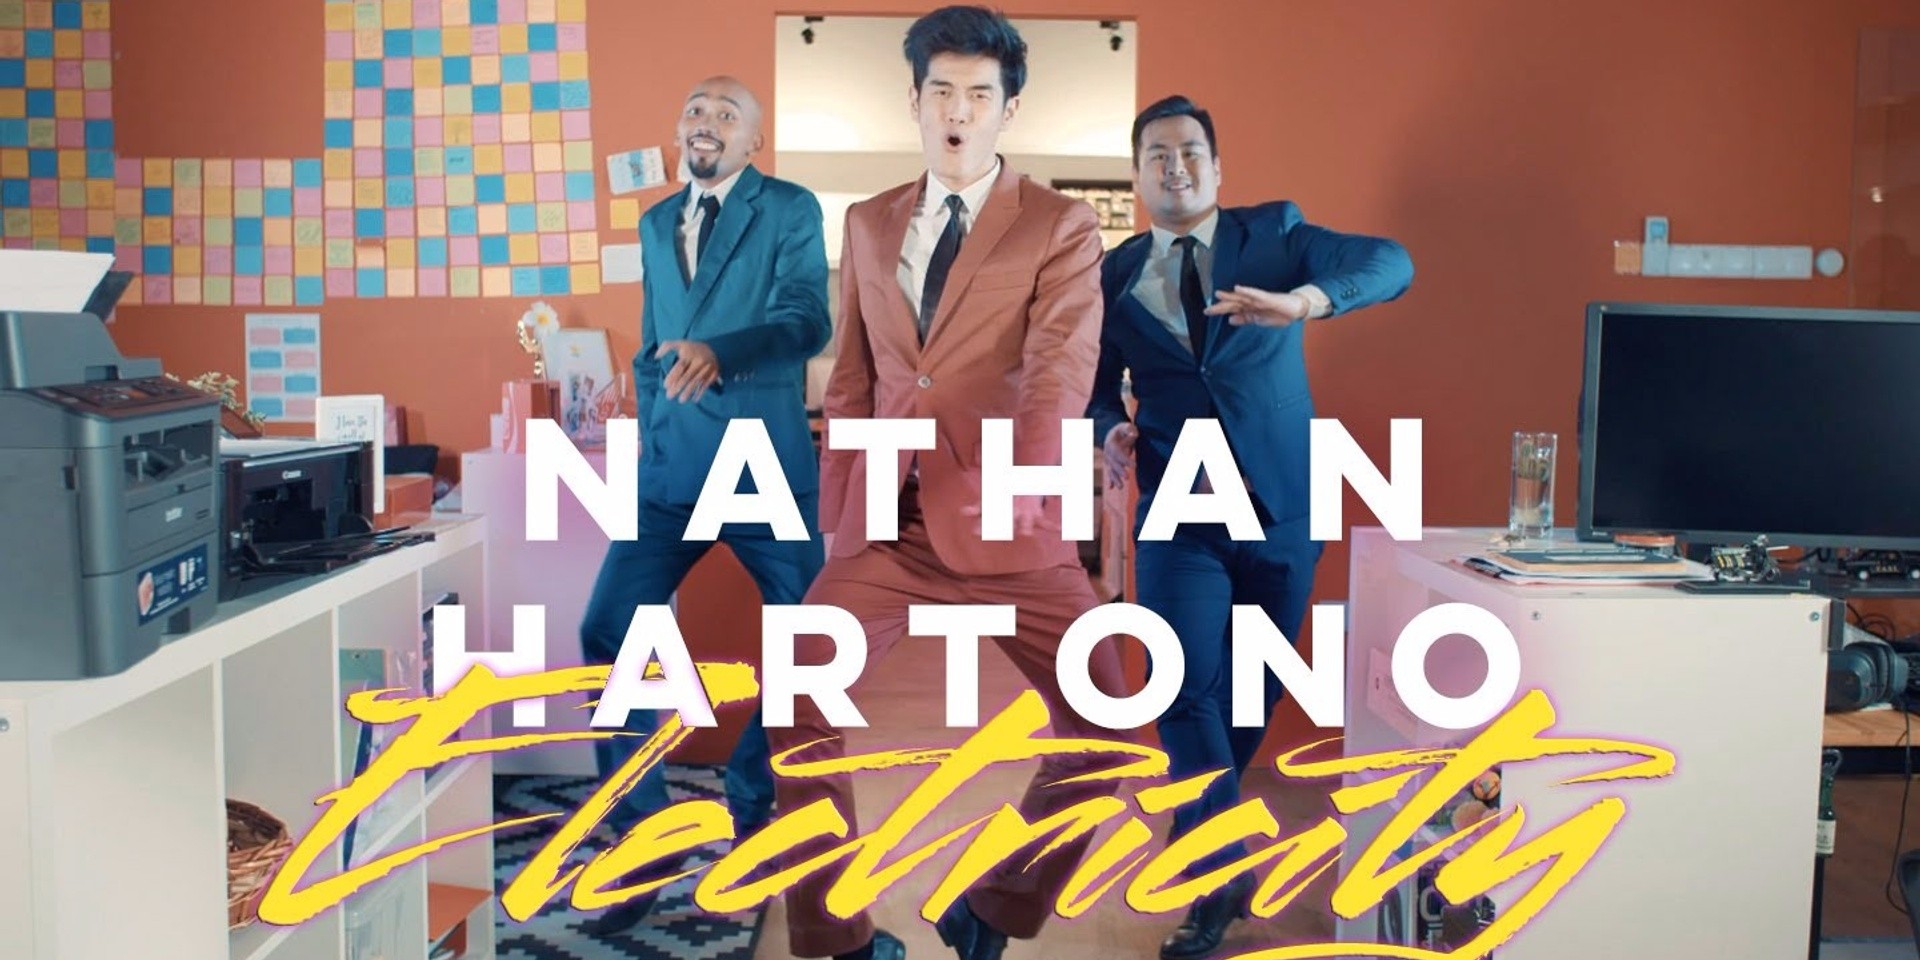 WATCH: Nathan Hartono artfully fills the role of crazed stalker in his new music video 'Electricity'